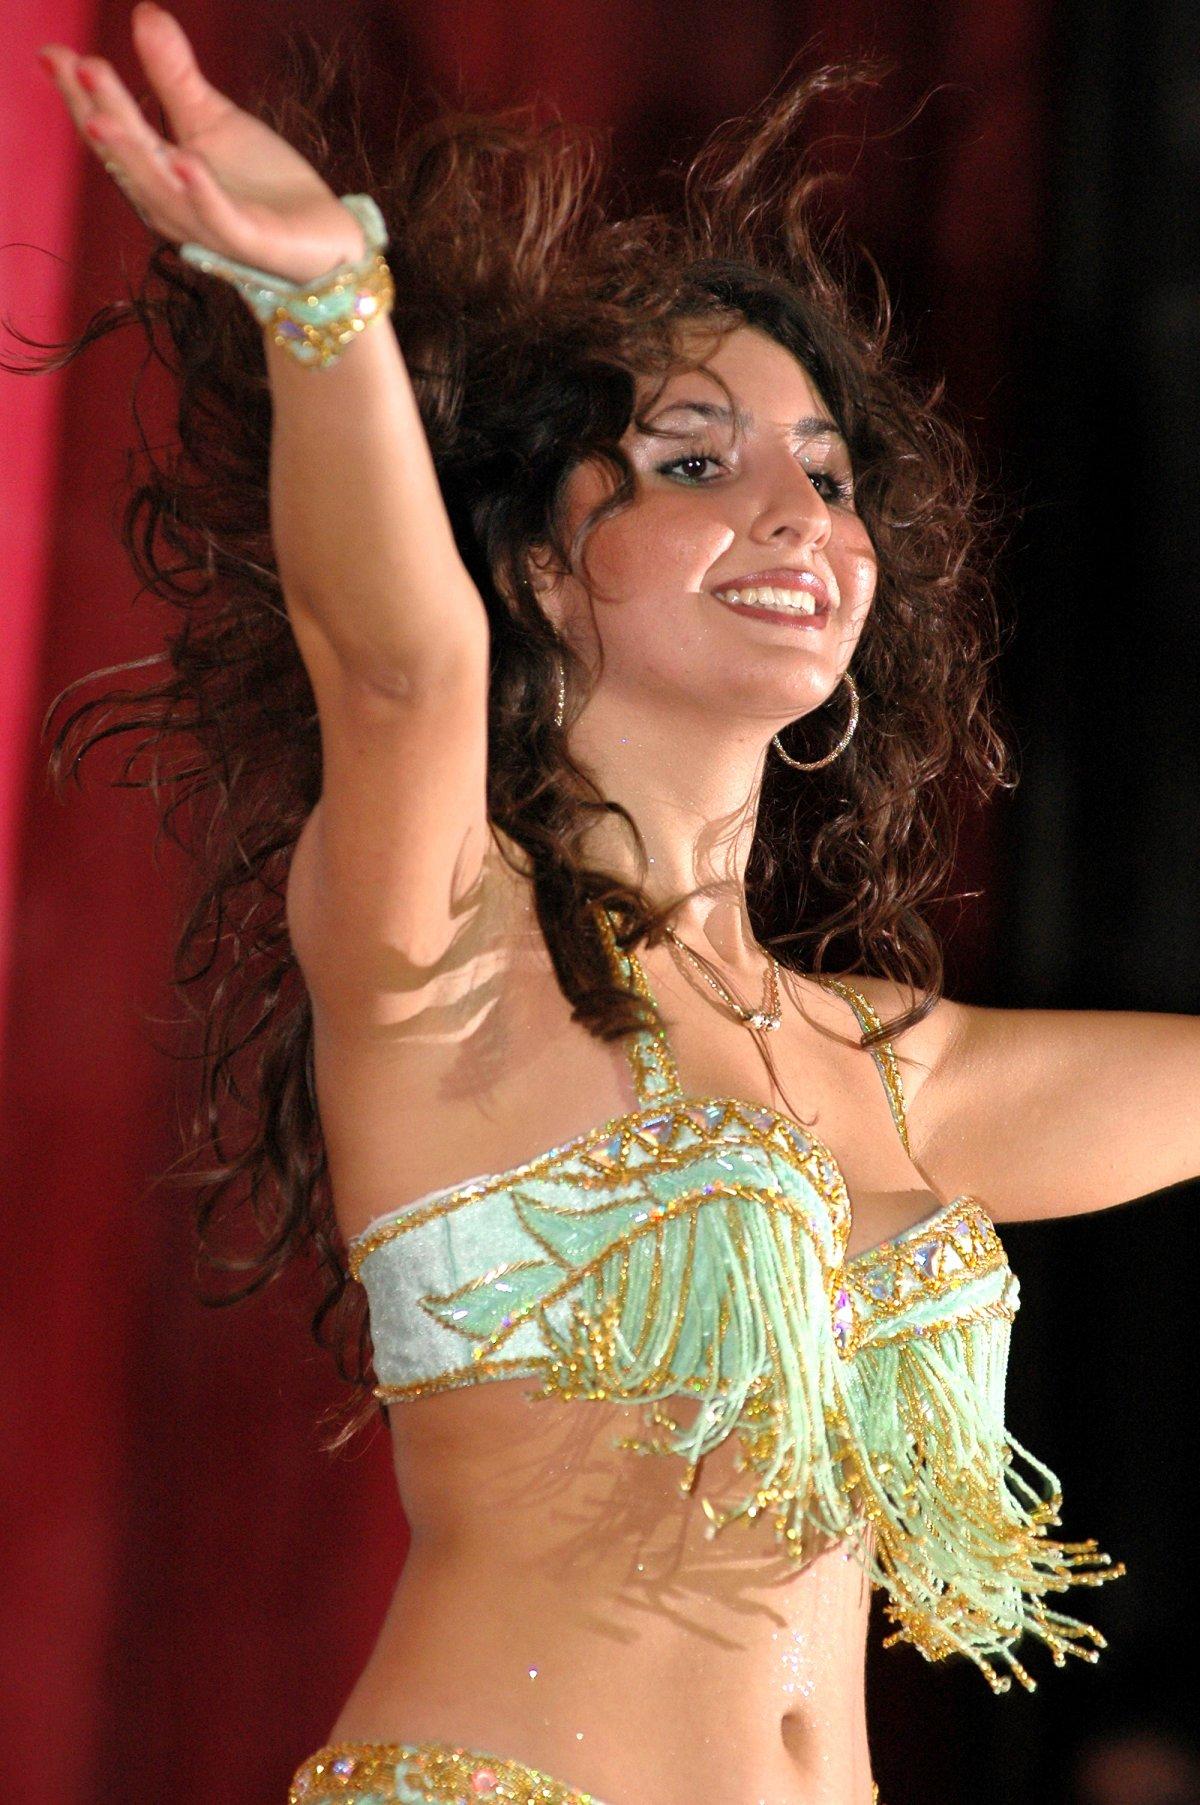 Learn How to Belly Dance for Beginners | TakeLessons